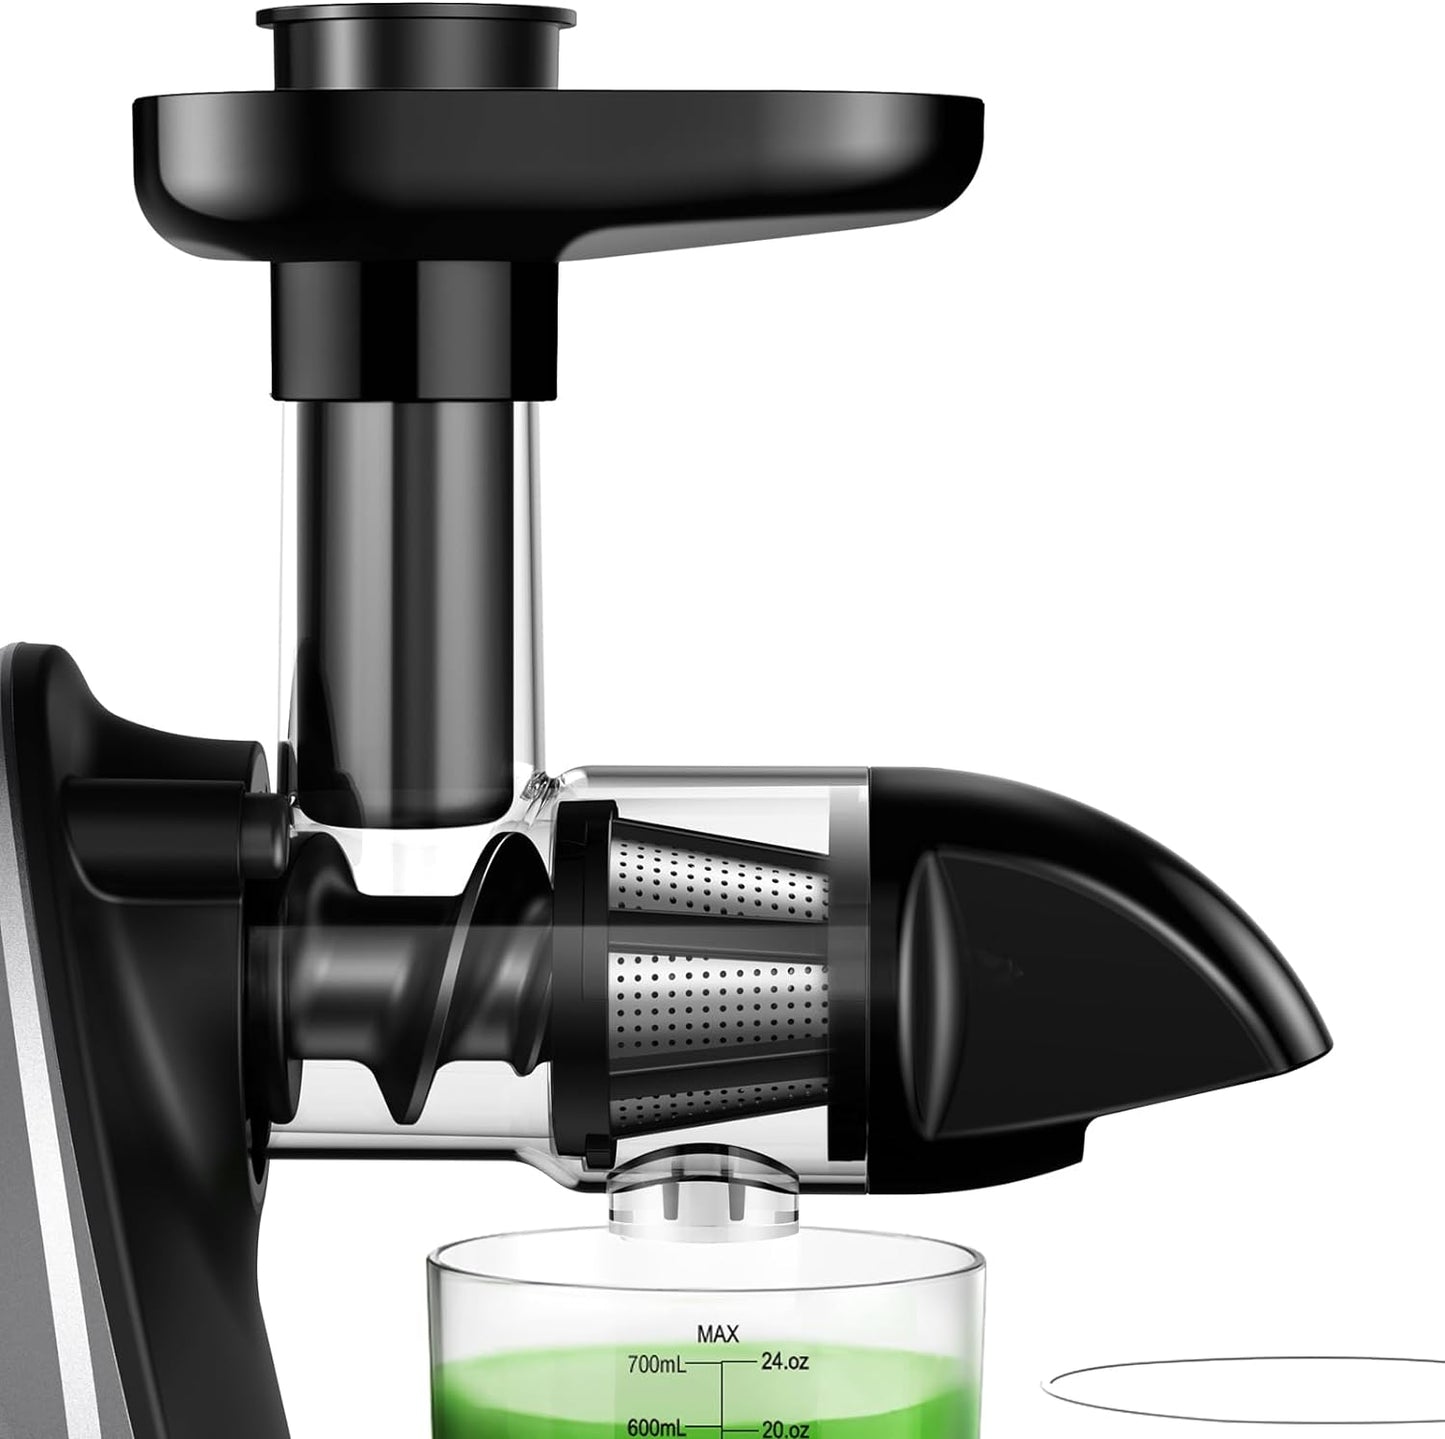 JOCUU ZM1503 Juicer Attachment Kit - Upgrade Aged Juicer to New One with Body, Auger, Filter, Chute & Cup,Compatible with JOCUU AMZCHEF Slow Juicer